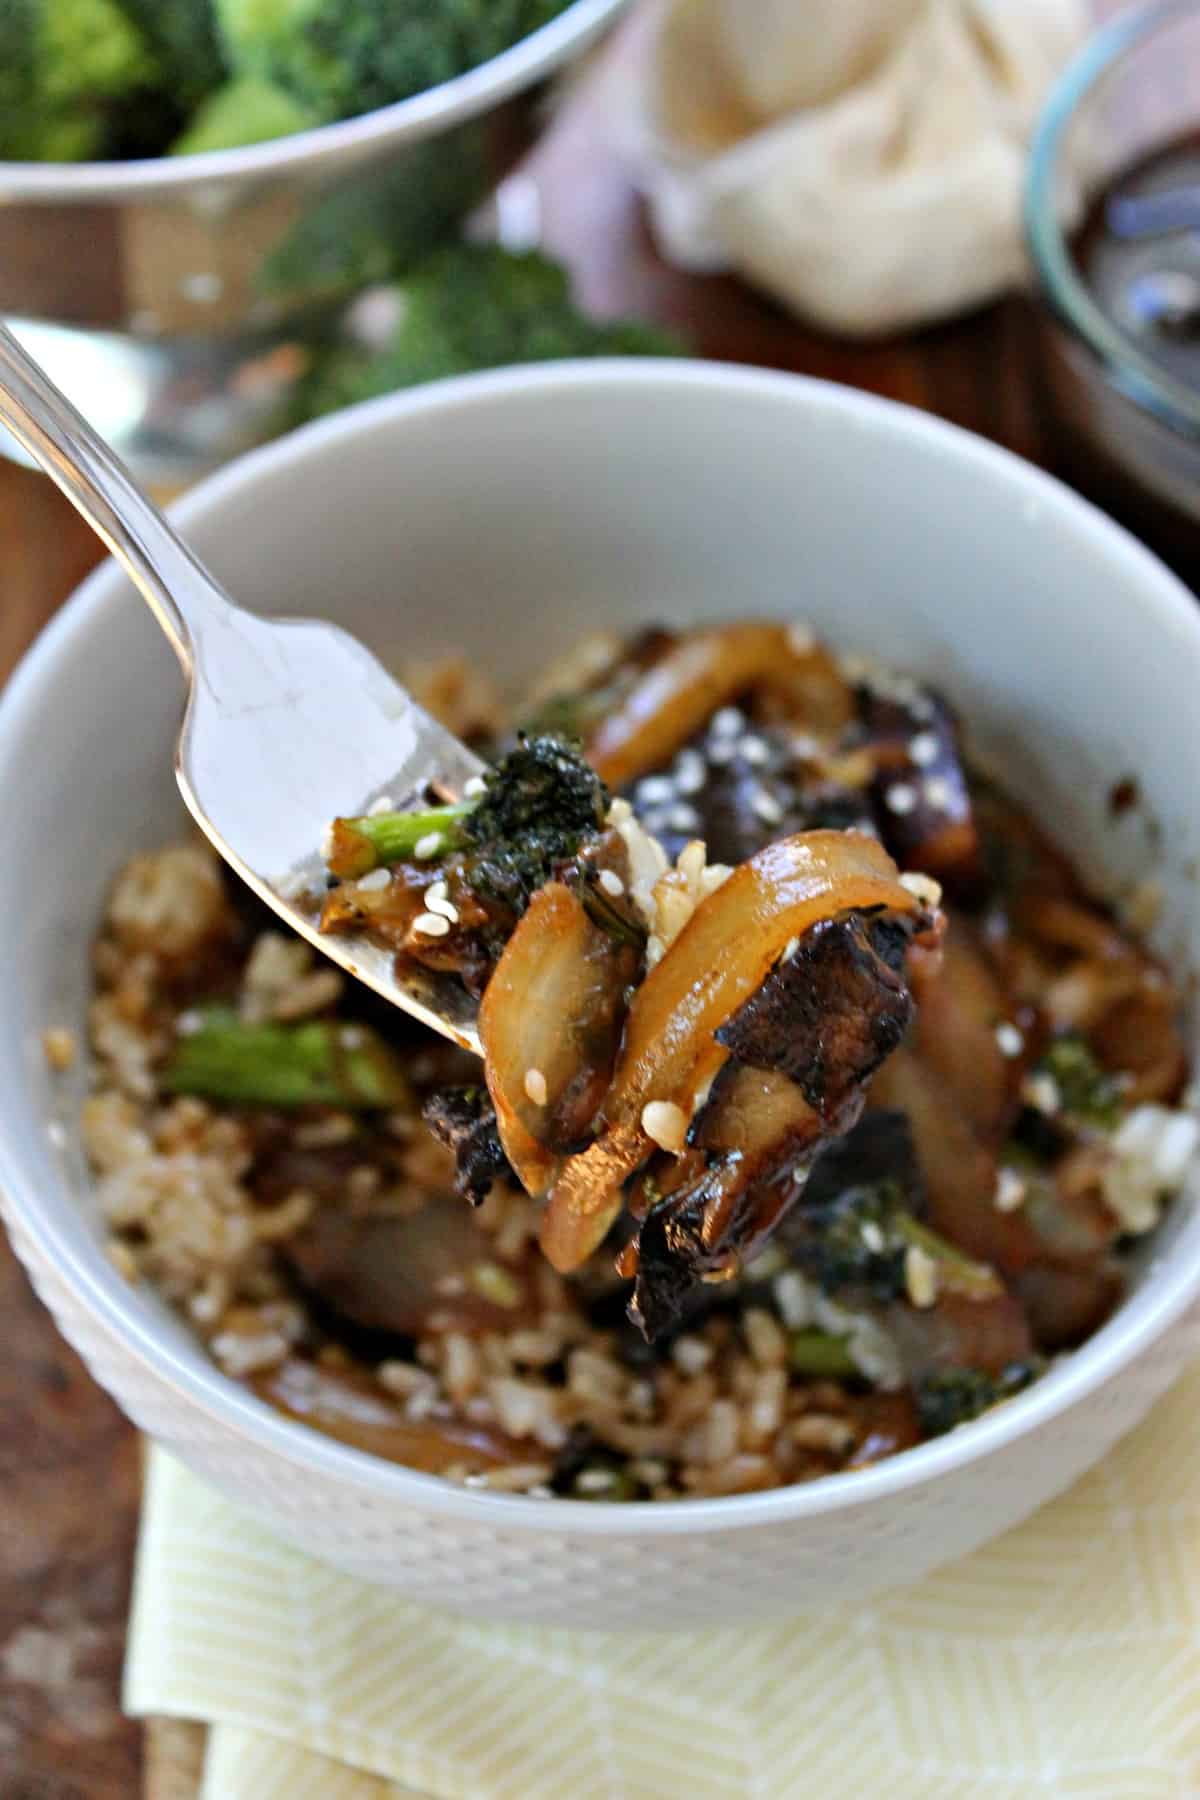 Asian inspired Teriyaki Mushroom Bowls are a simple and healthy lunch or dinner